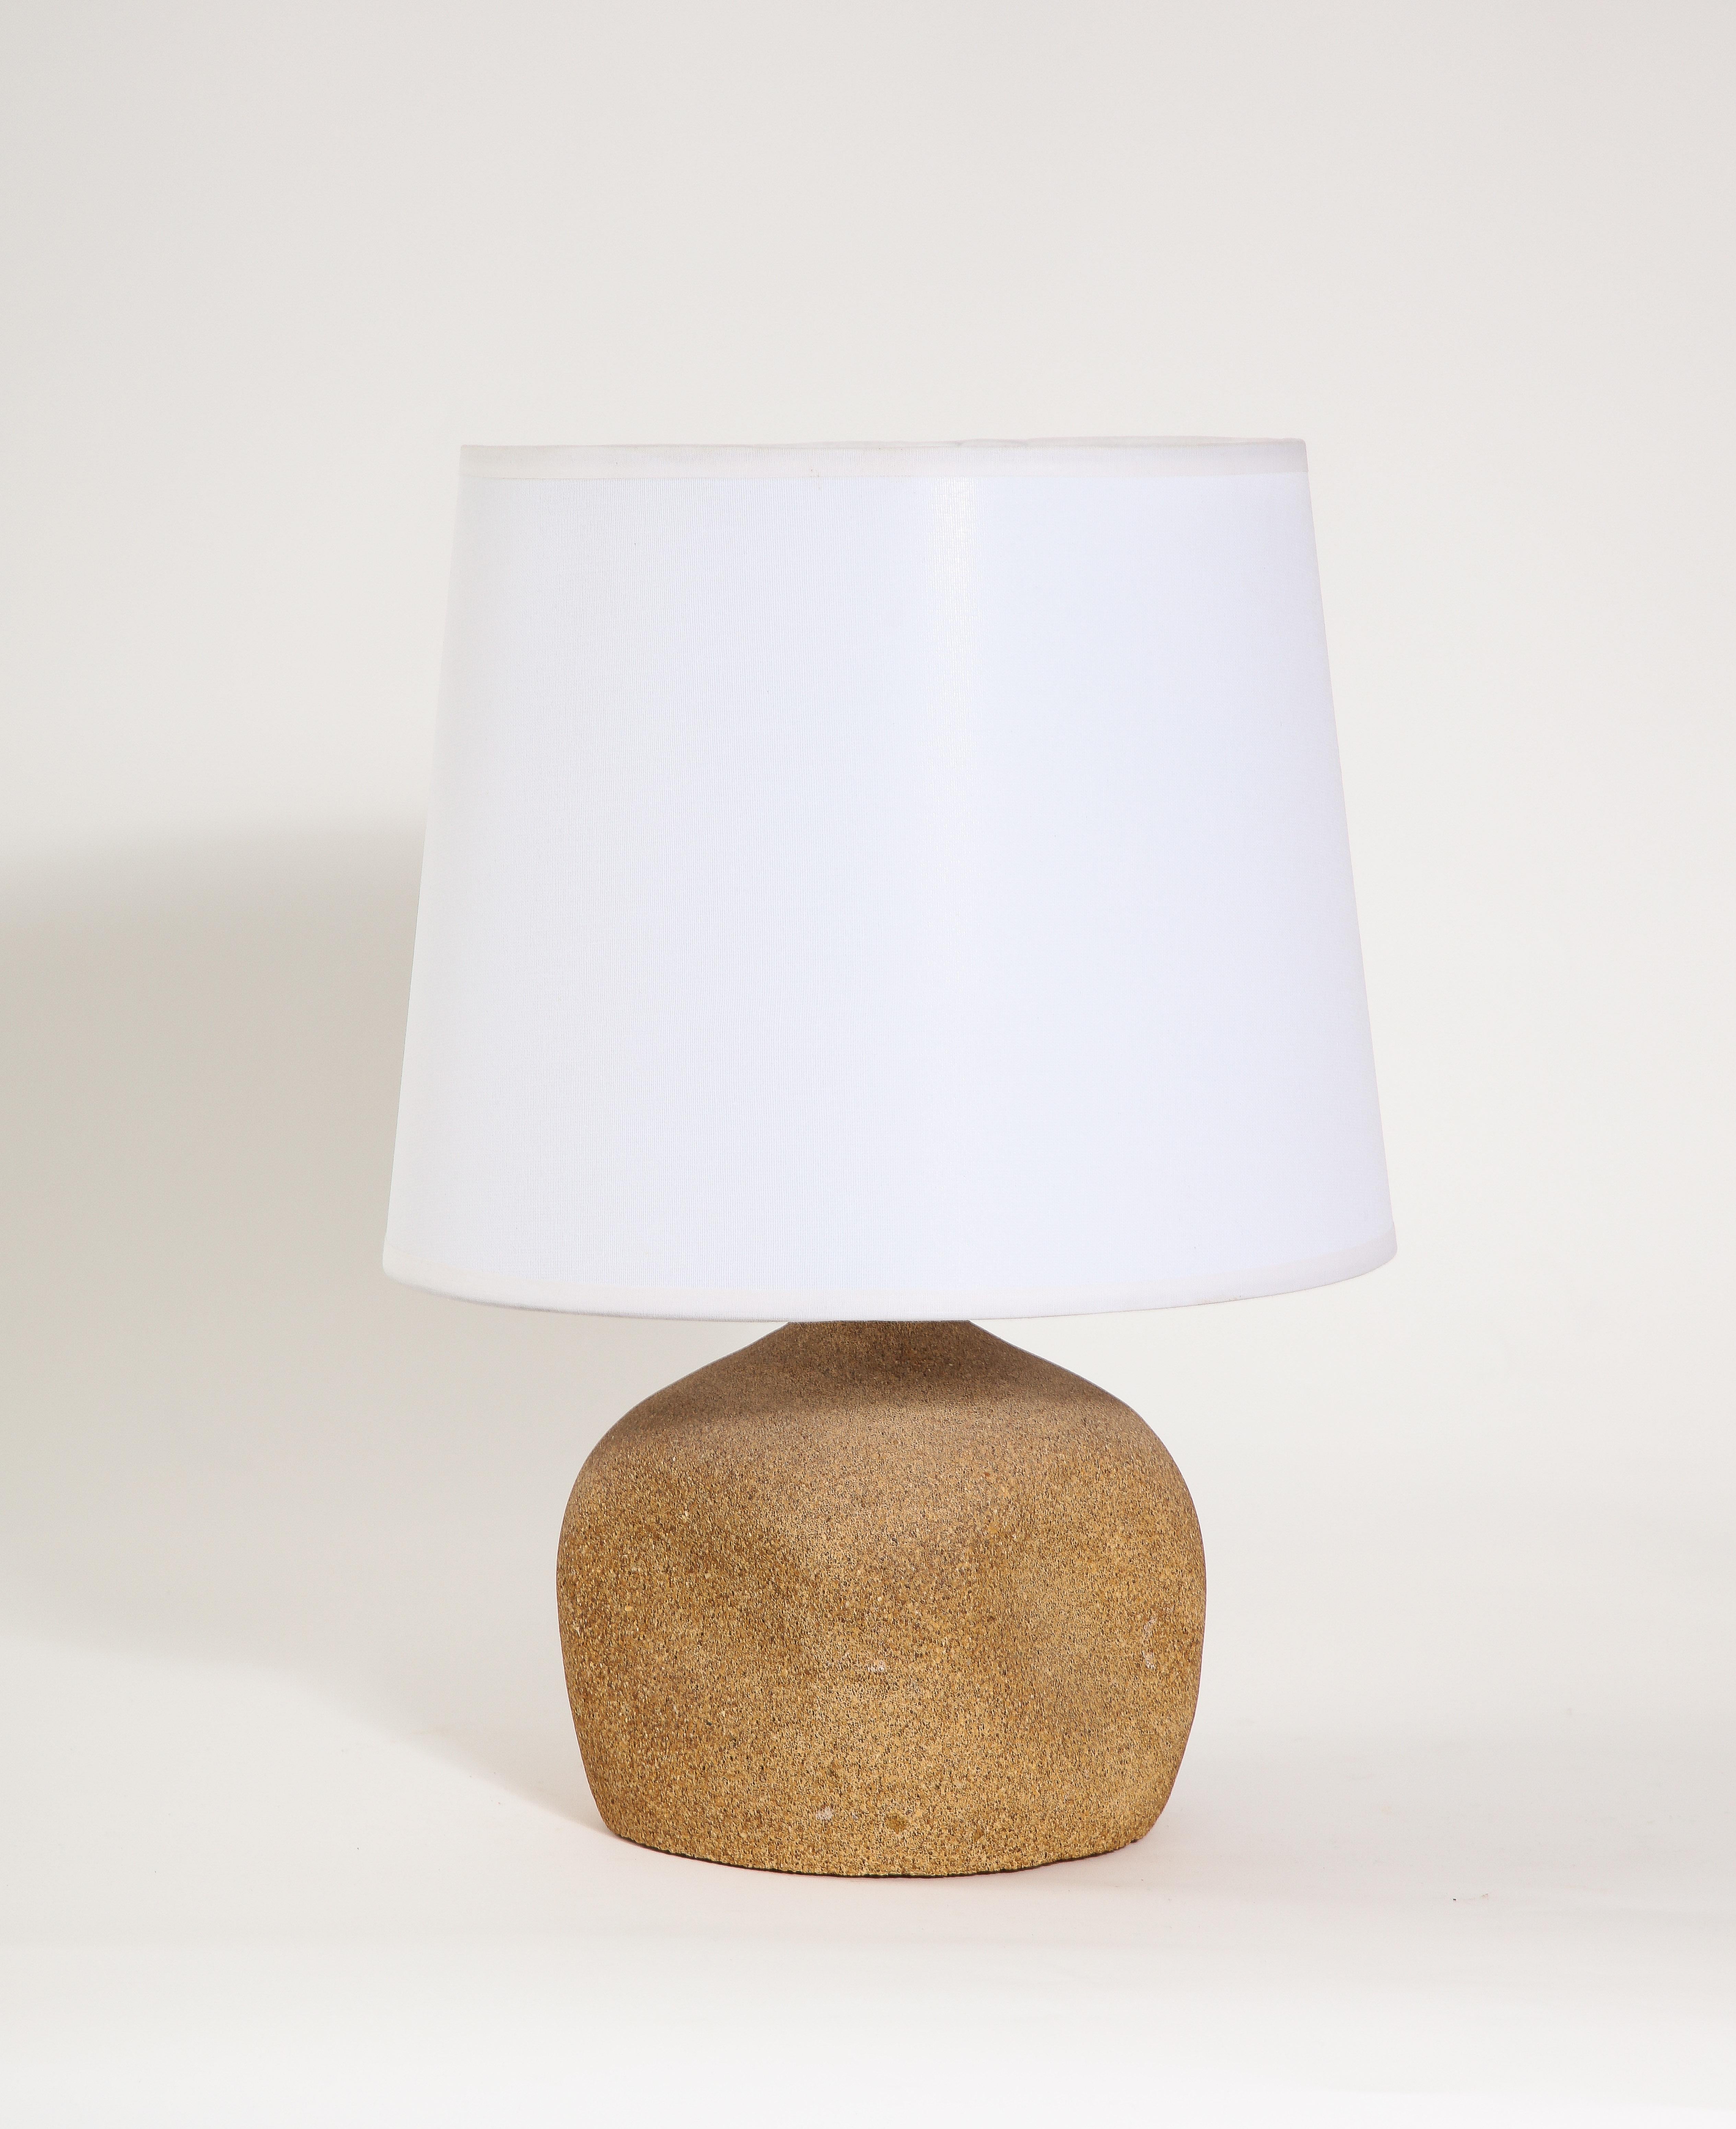 Rounded square earthenware table lamp with a dimpled pattern

10x6x6 Base Only